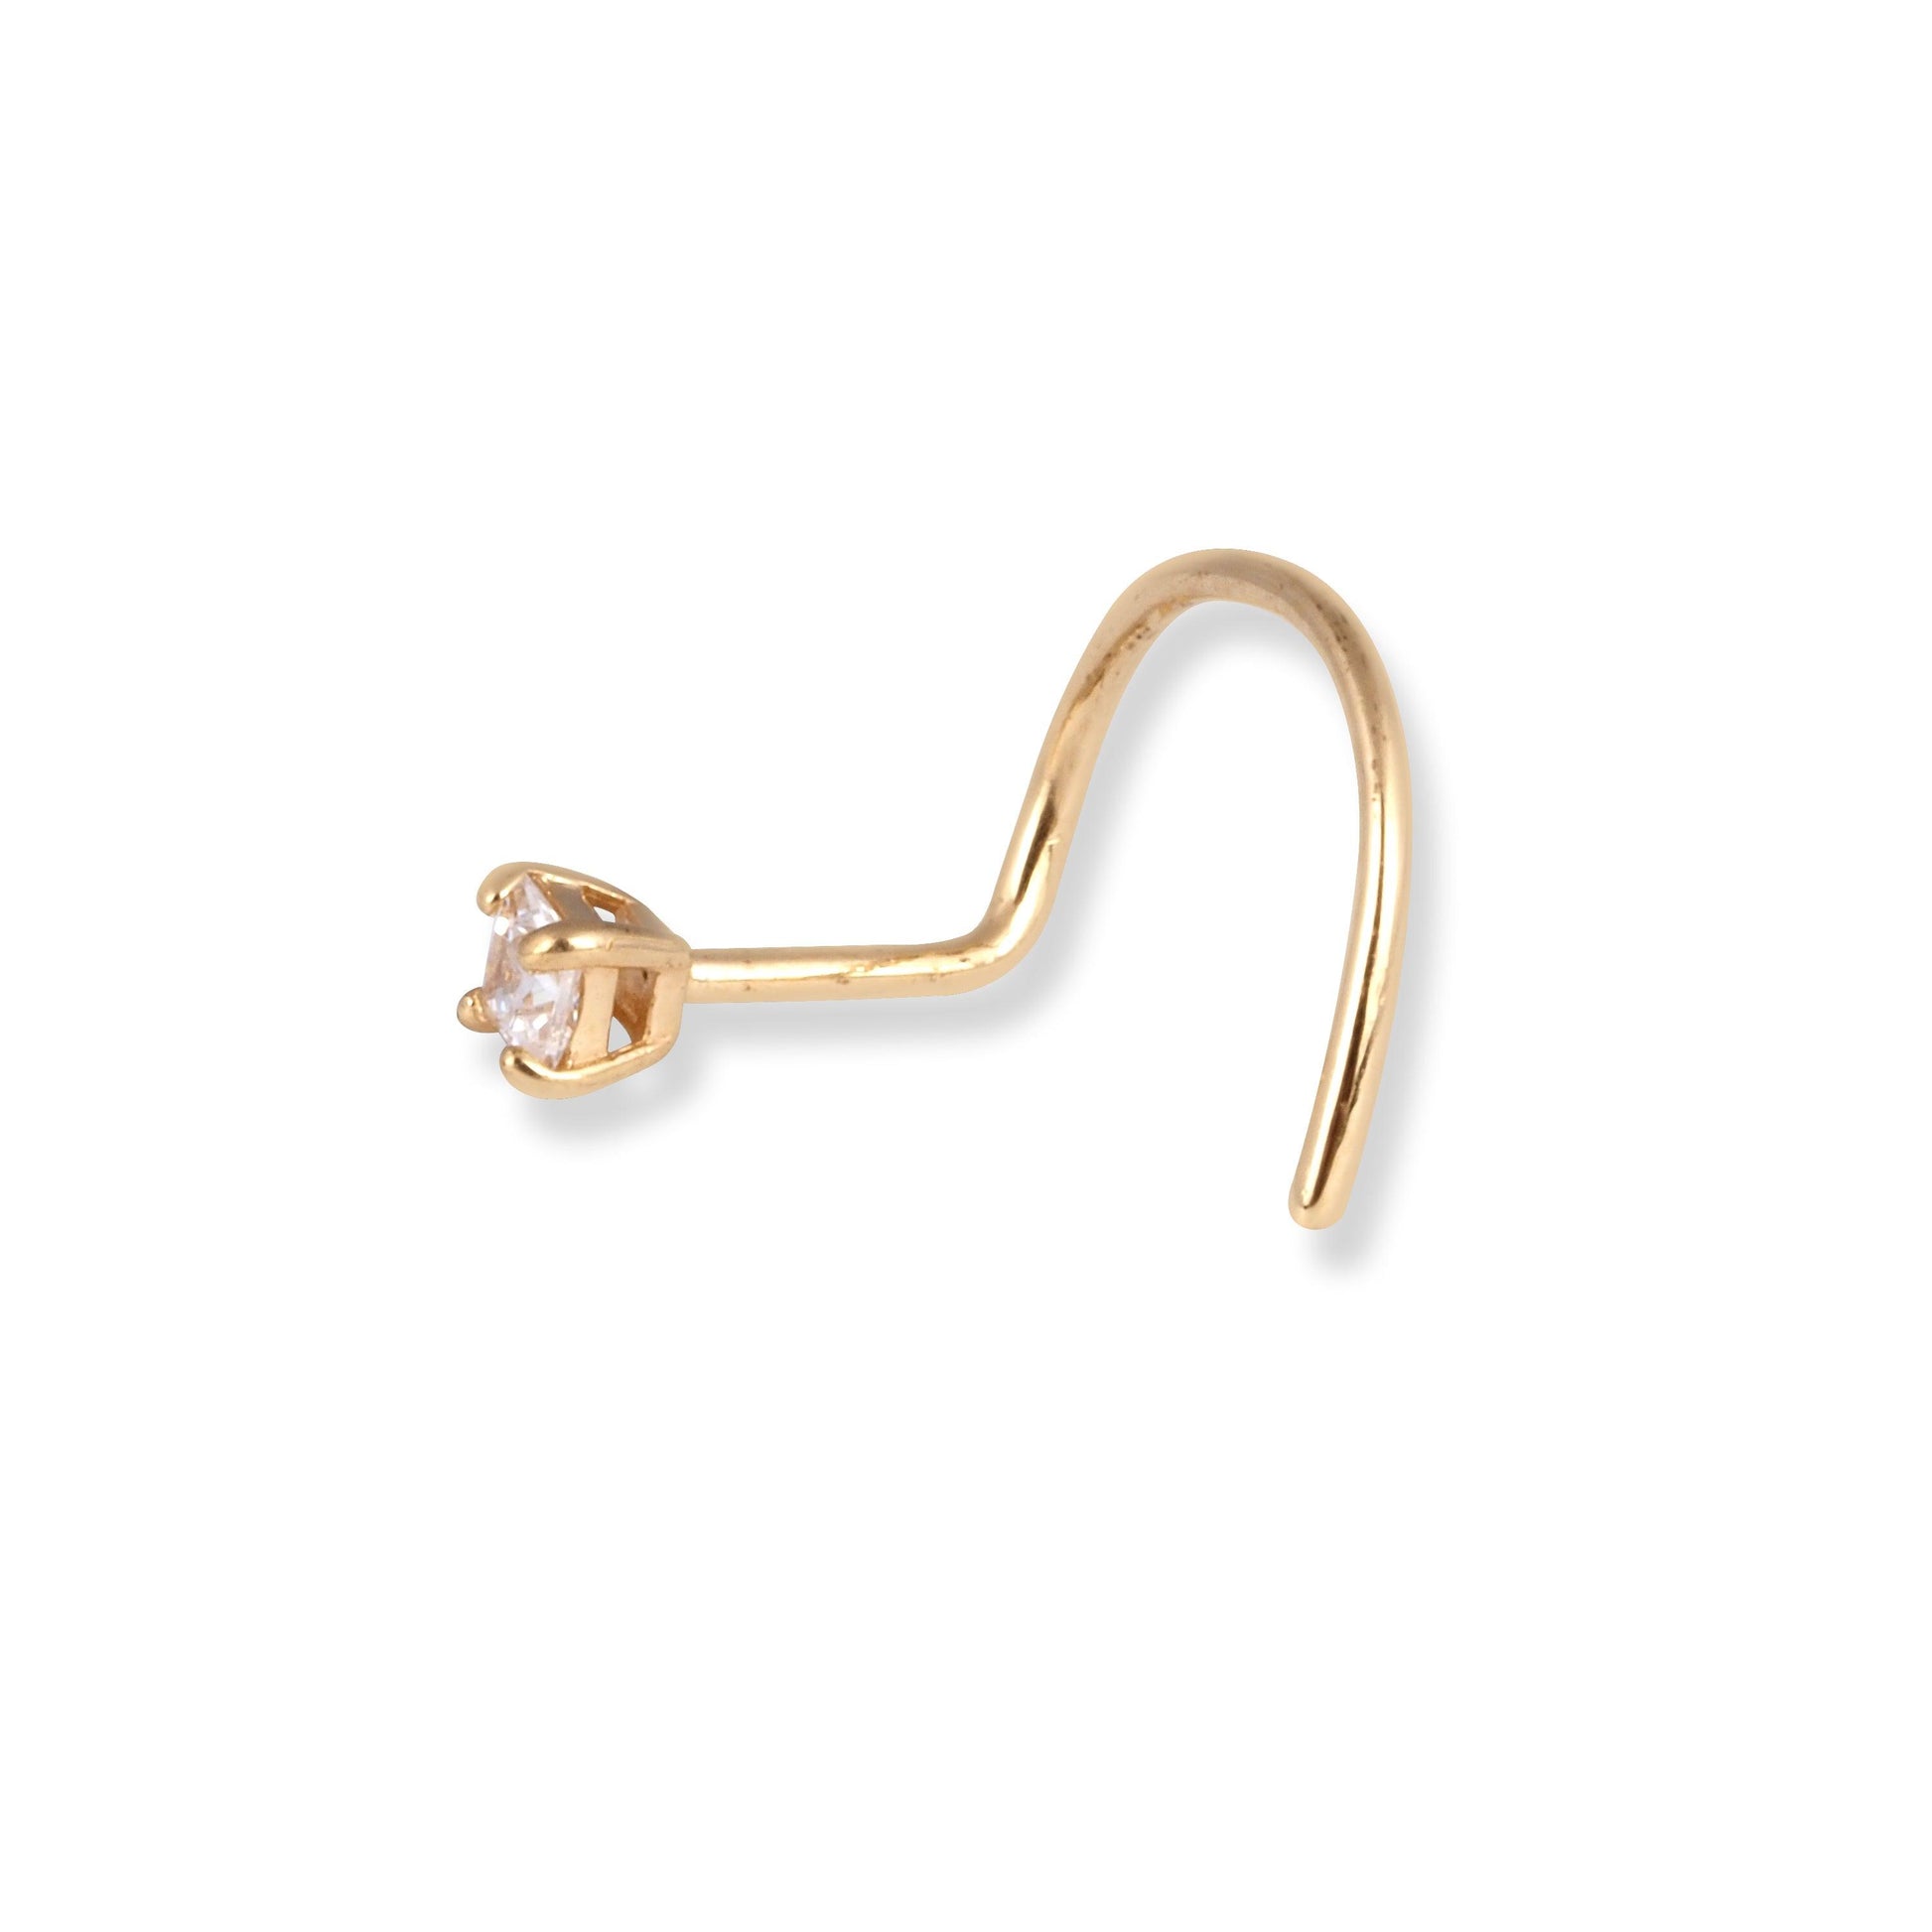 18ct Yellow Gold Wire Back Nose Stud with Princess Cut Cubic Zirconia Stone in Four Claw Setting NS-7564 - Minar Jewellers